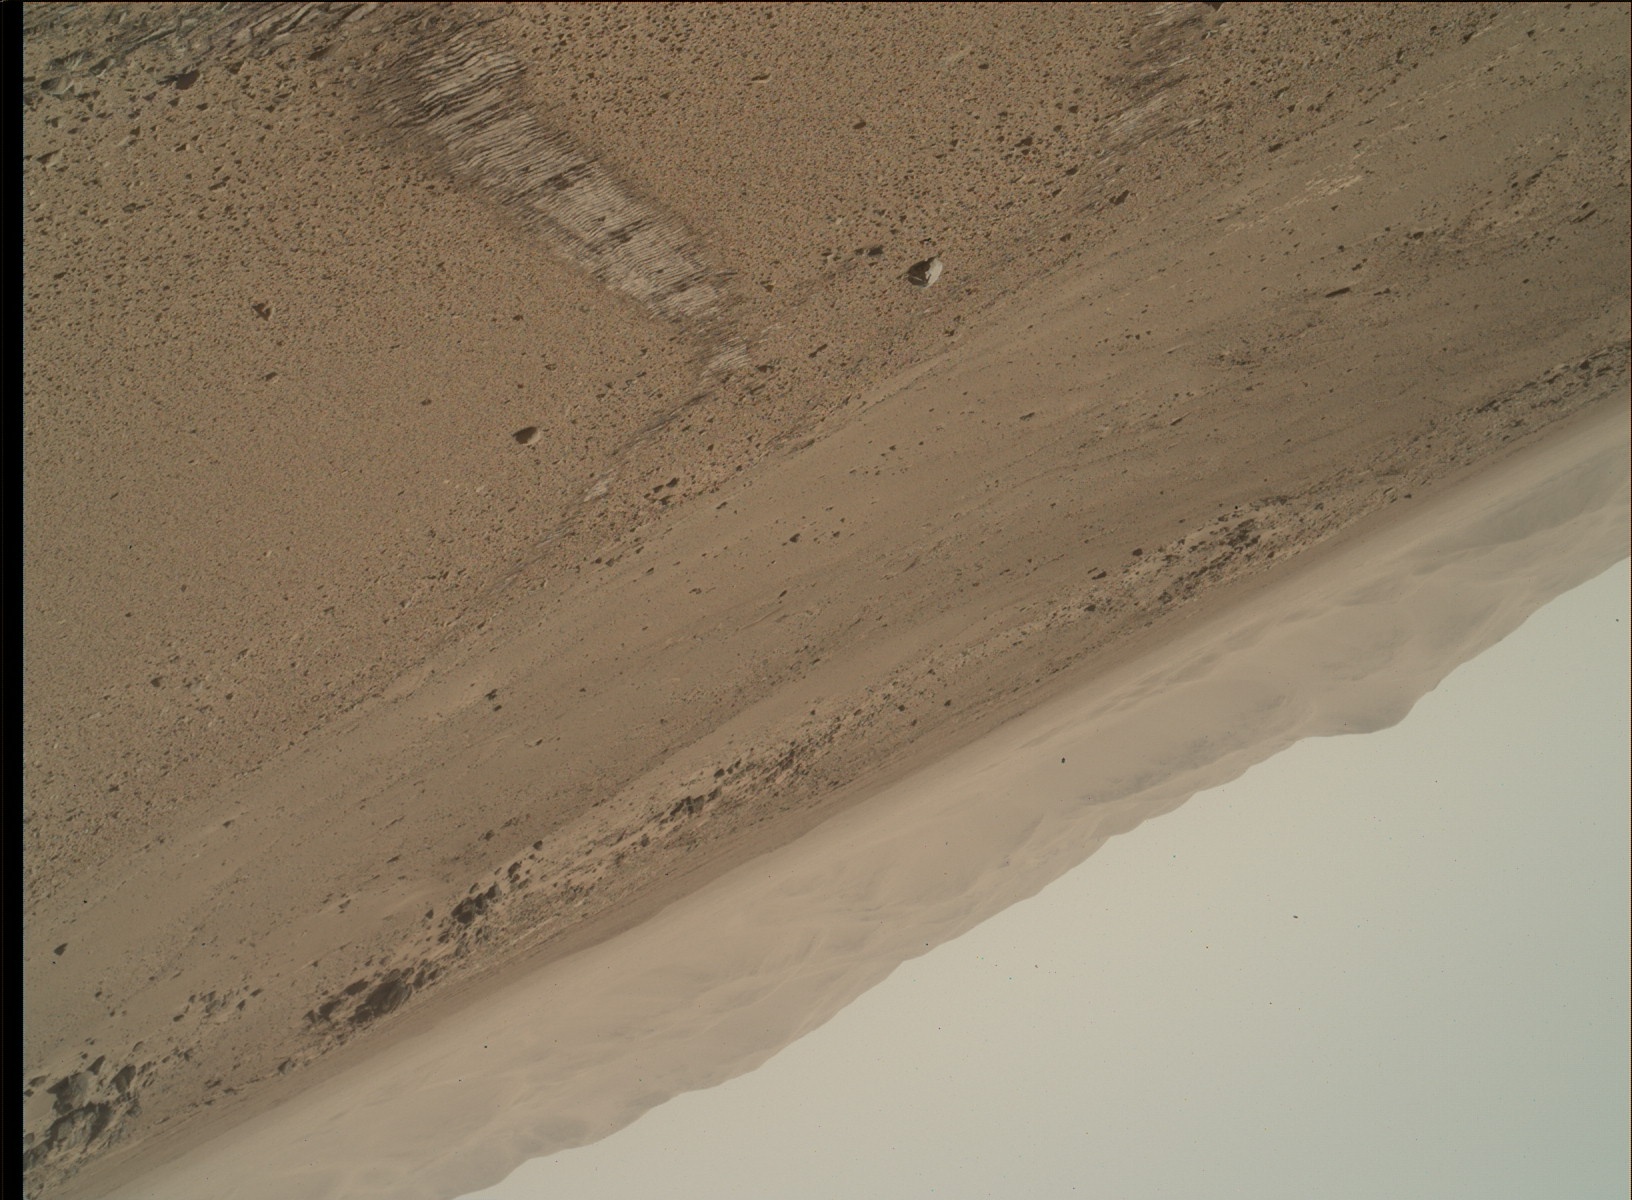 Nasa's Mars rover Curiosity acquired this image using its Mars Hand Lens Imager (MAHLI) on Sol 565